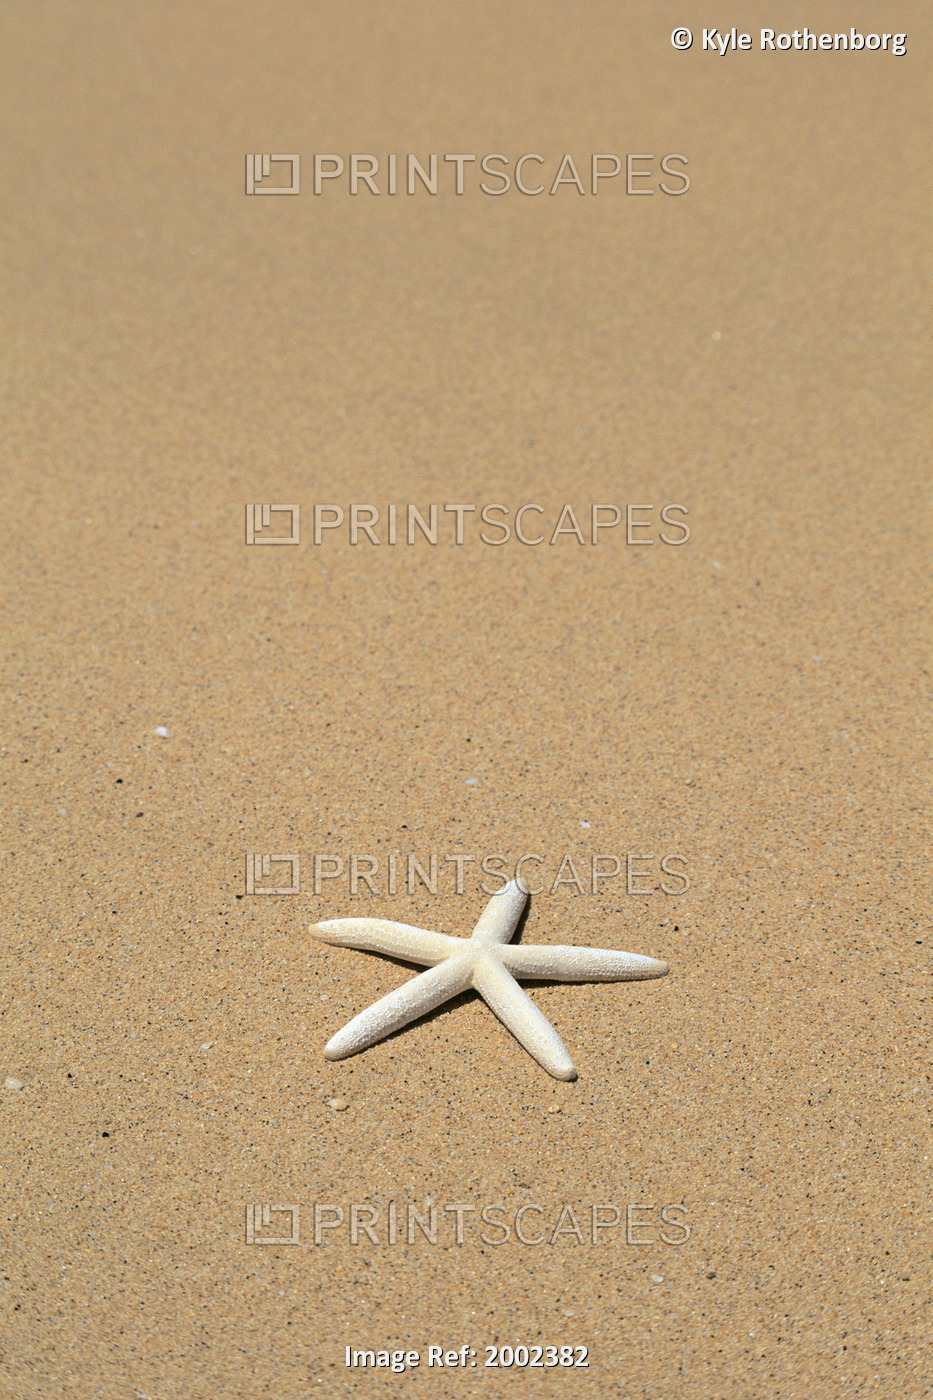 Side View Close-Up Of Single White Starfish On Sandy Beach